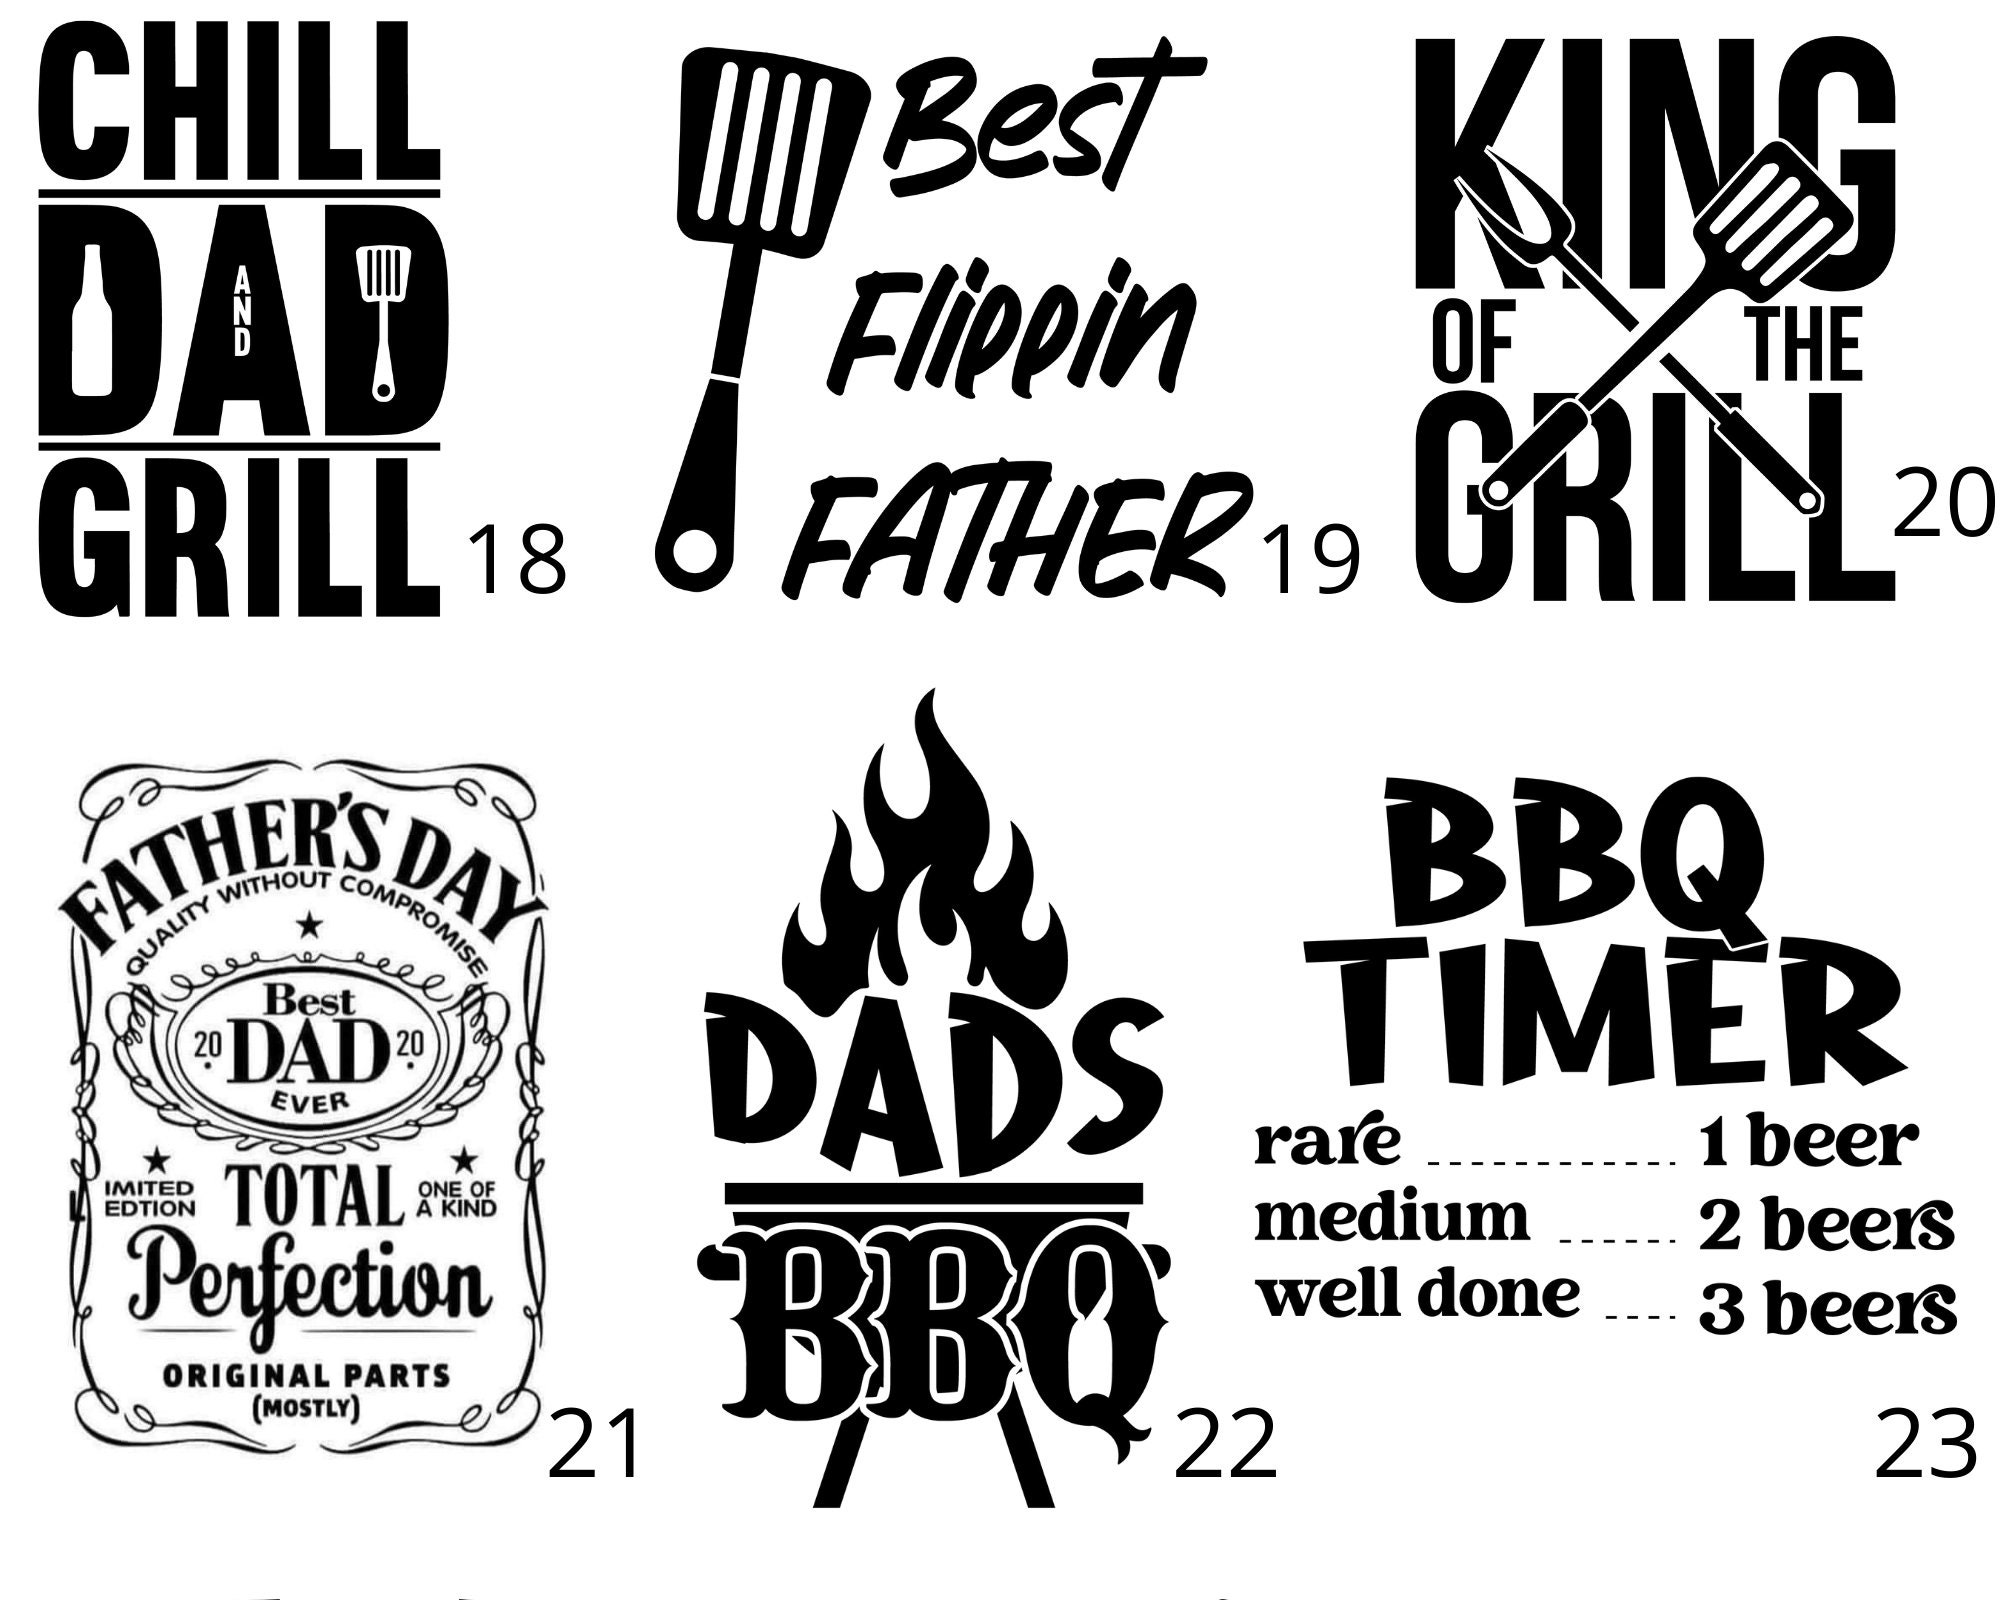 XAIVEZL Father's Day Aprons for Men Birthday Gifts for Men Unique Funny  Gifts for Husband Dad Boyfriend Grilling BBQ Grill